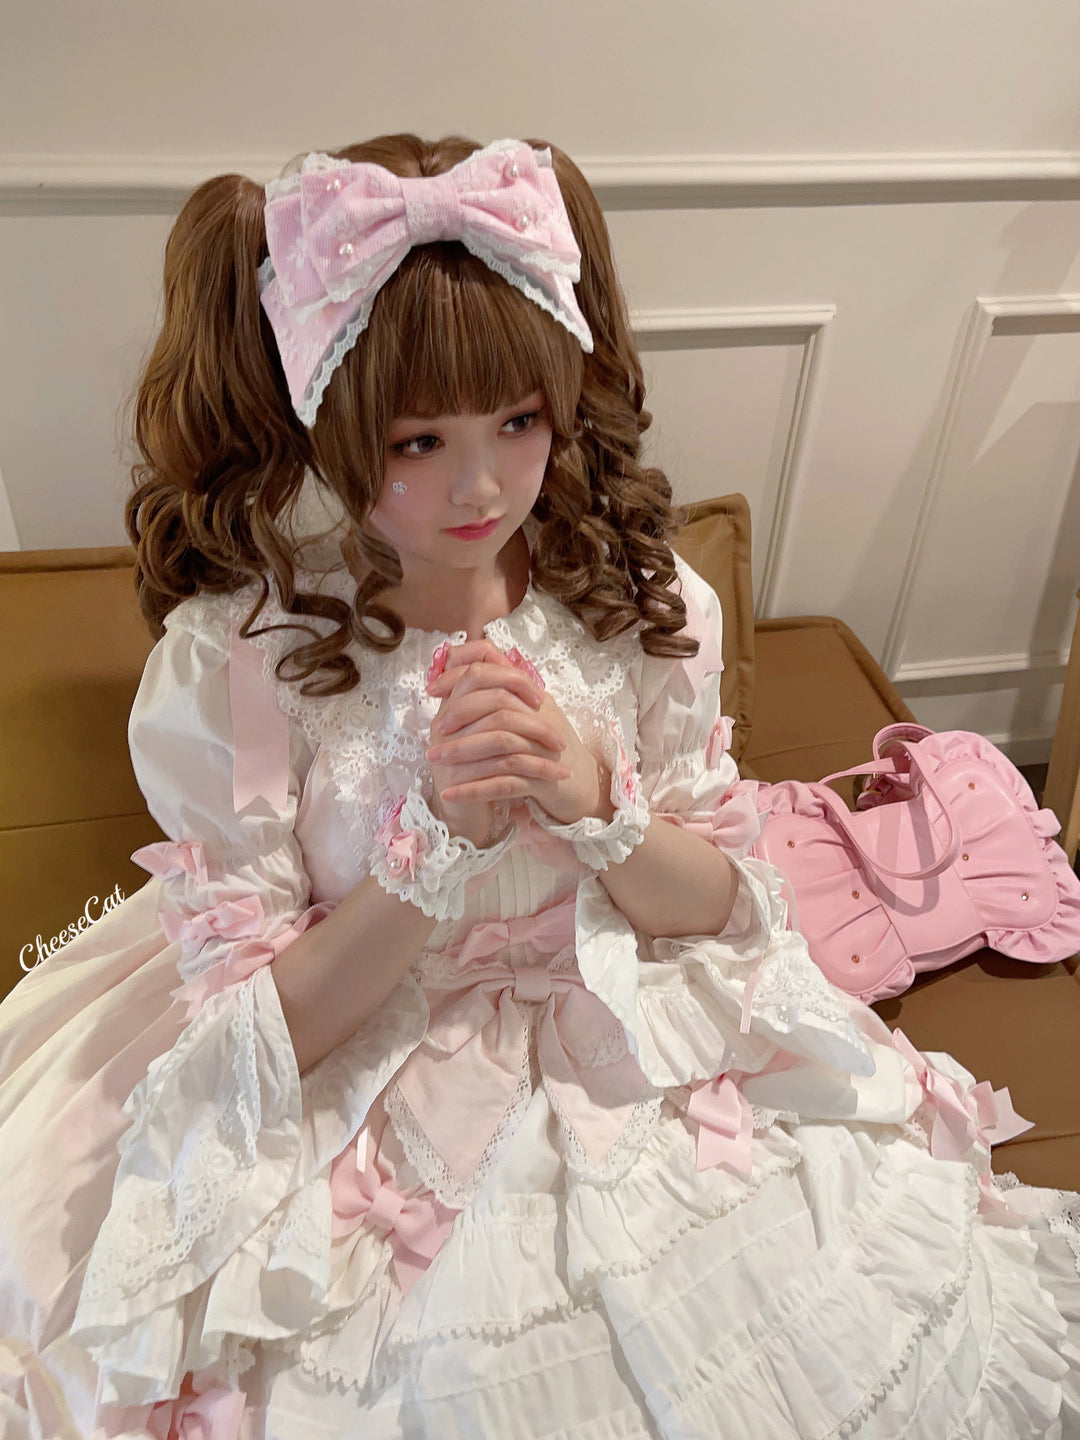 (Buyforme)Cheese Cat~Sweet Lolita KC Lace Butterfly Lolita KC with Pearl   